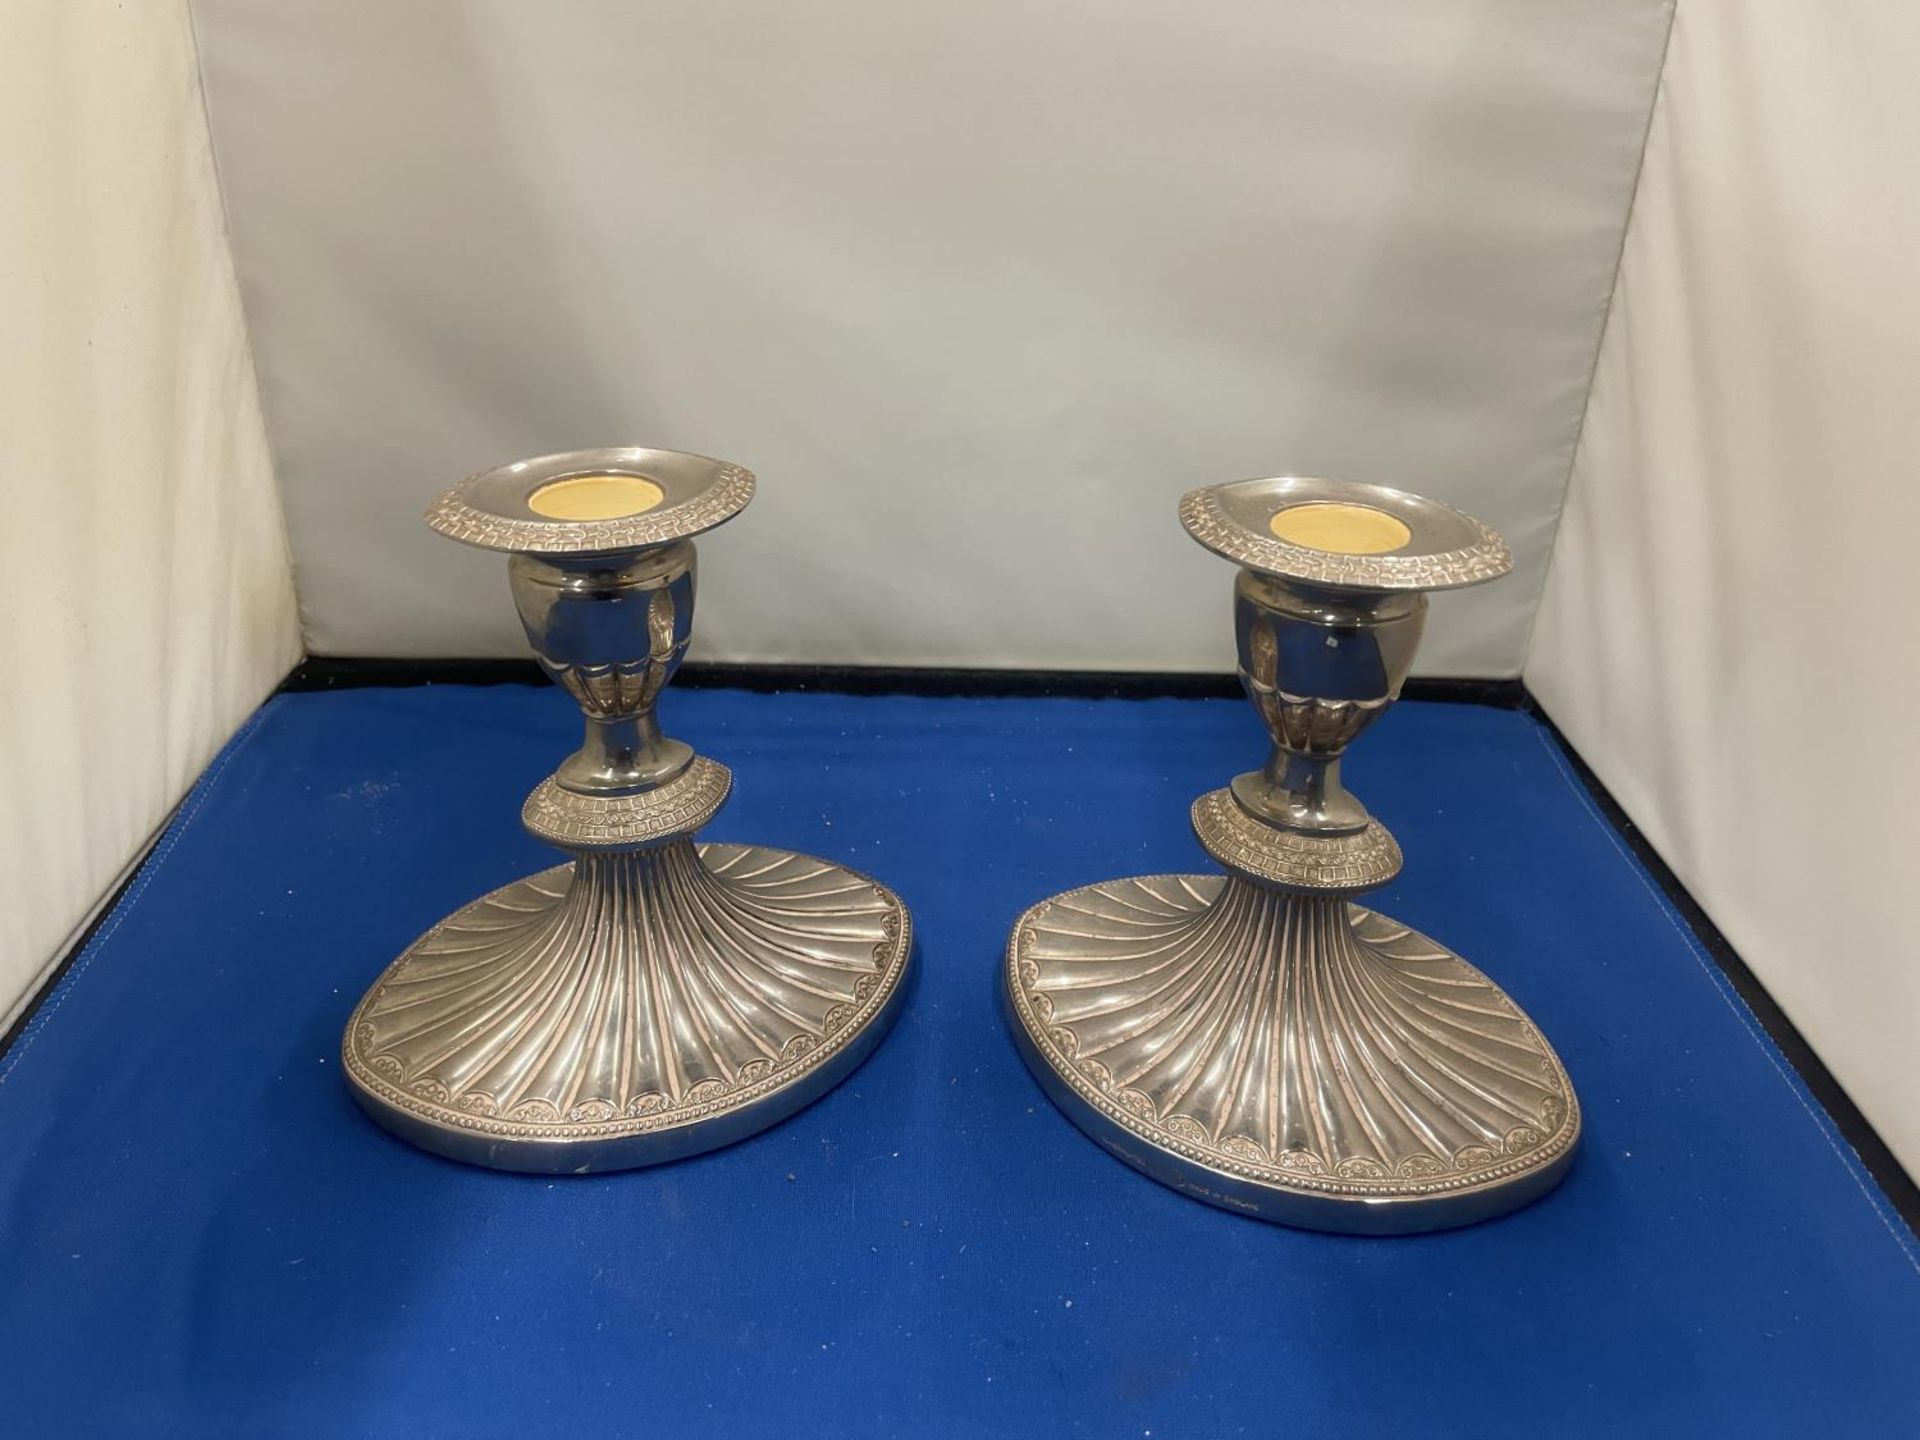 A PAIR OF HEAVY ART DECO STYLE SILVER PLATED CANDLESTICKS